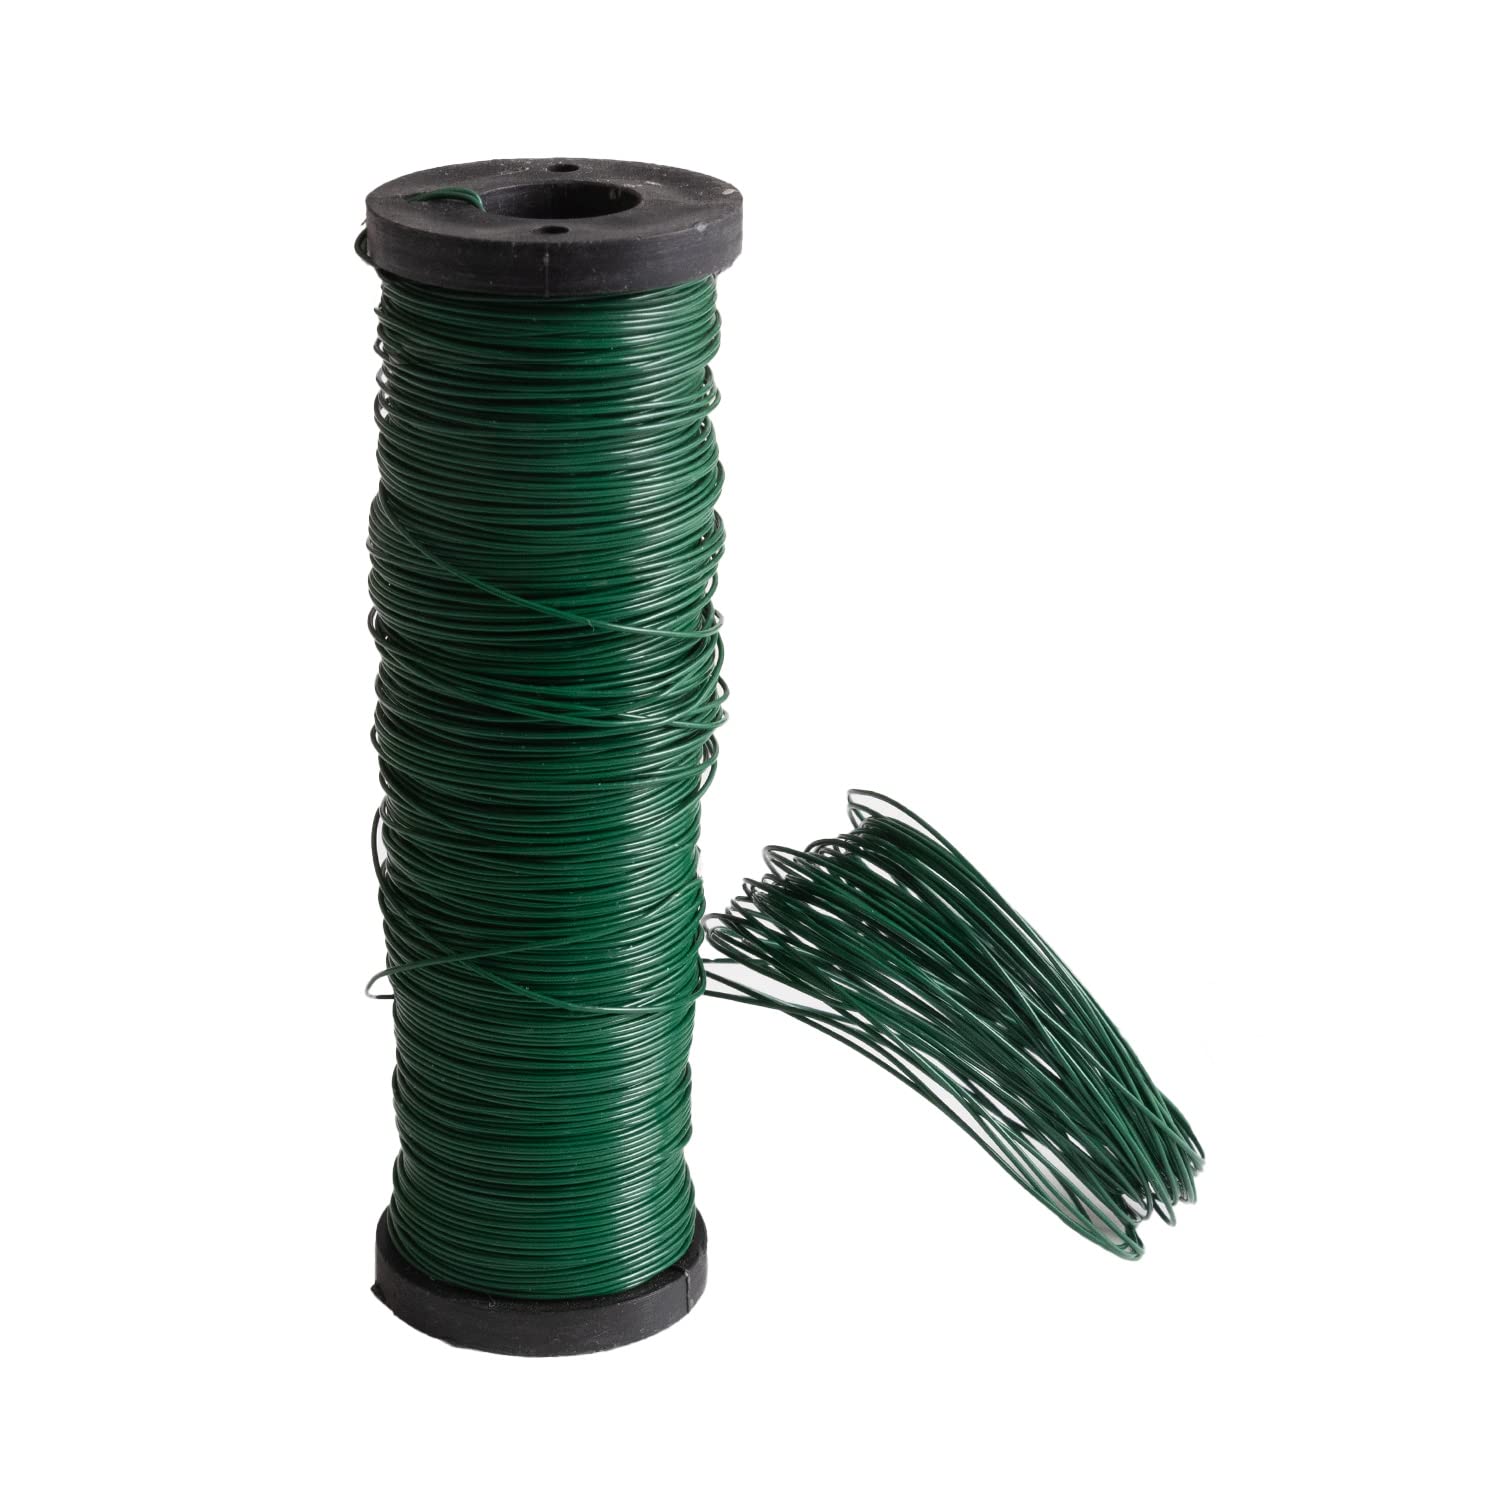 24 Gauge Floral Wire on Paddle: Green (4 Ounces)